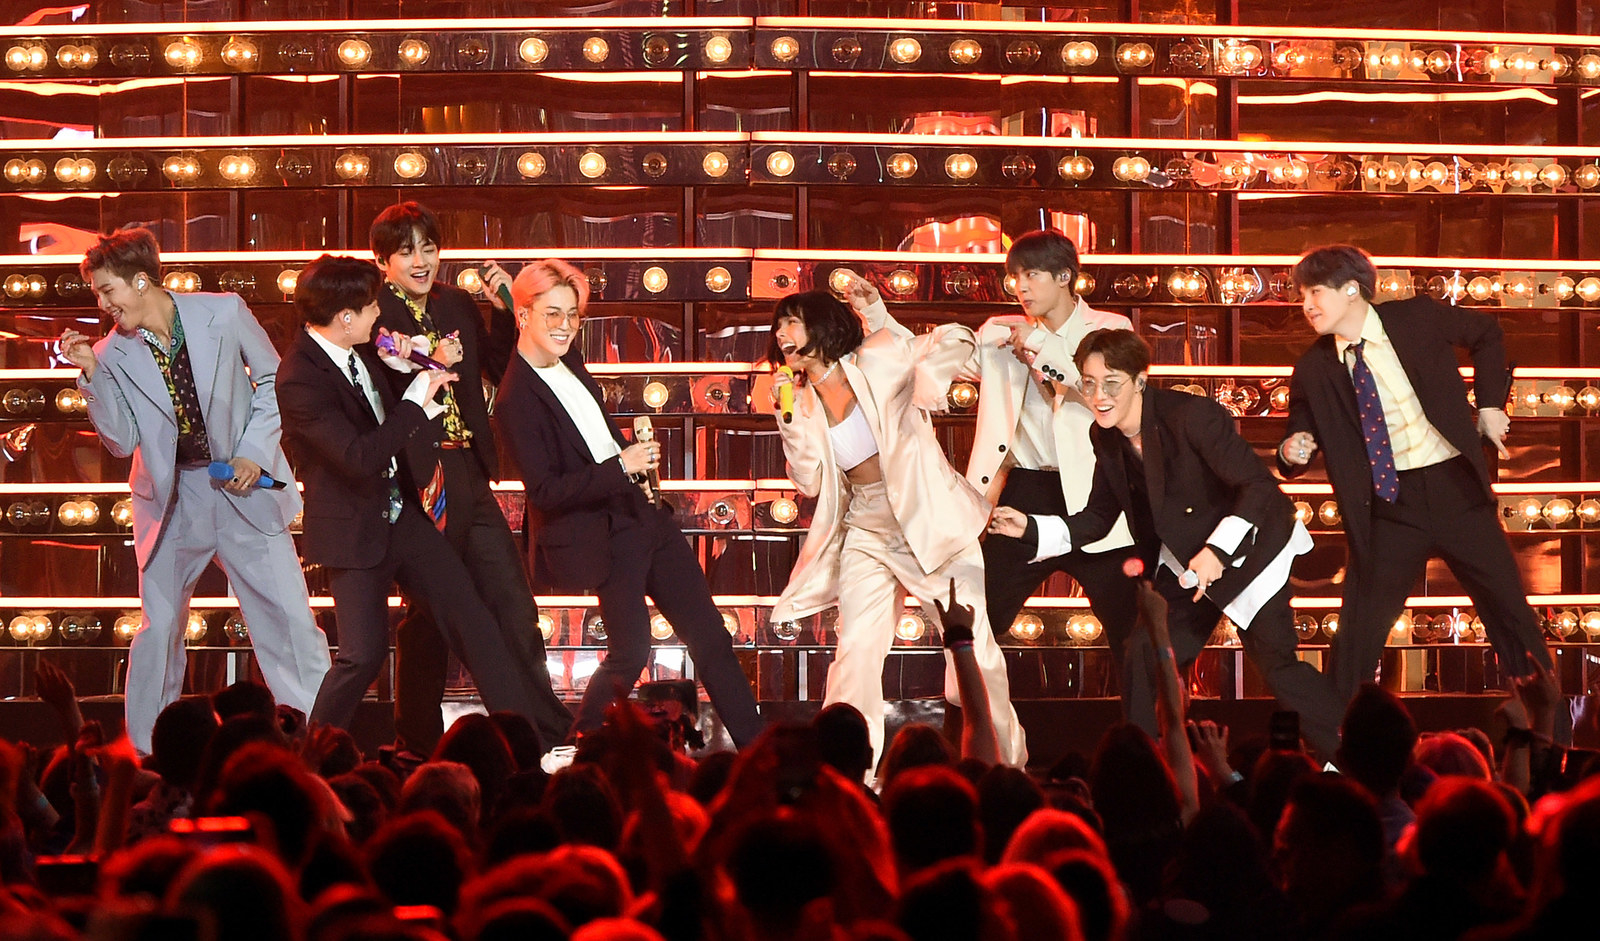 Watch: BTS and Halsey show off matching friendship bracelets | Metro Video